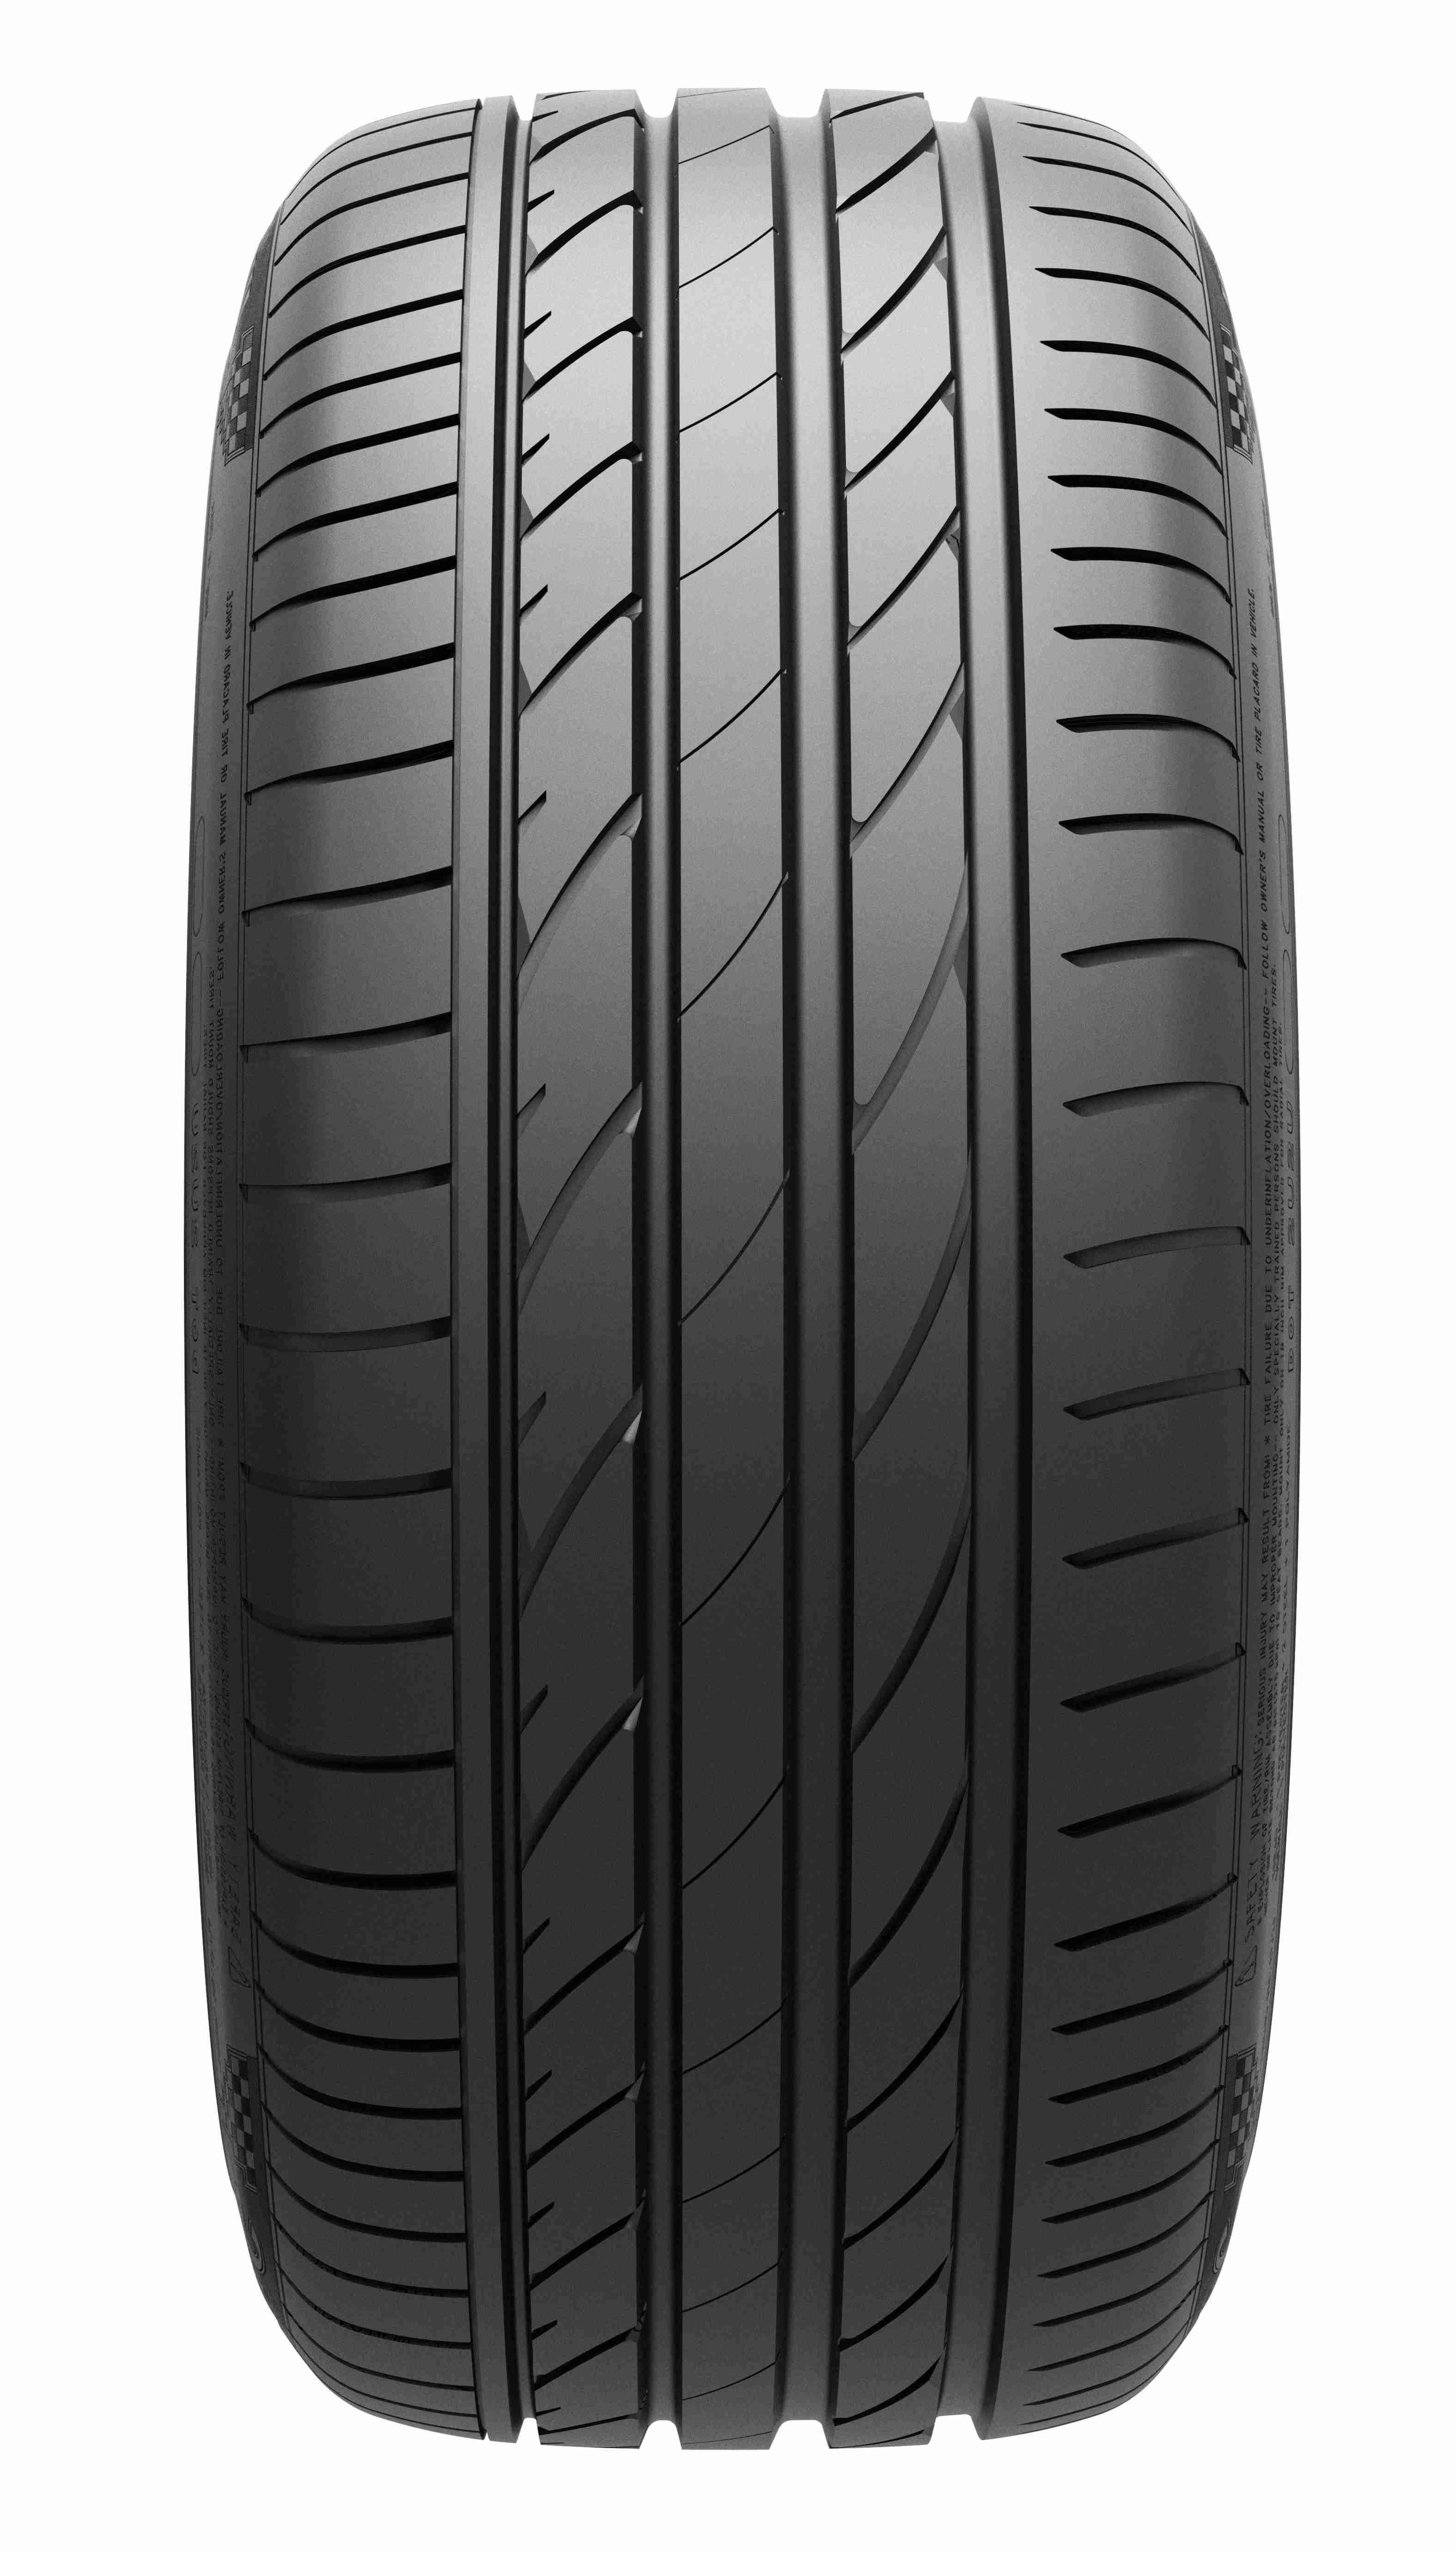 Резина maxxis victra sport. Maxxis Victra Sport vs5. Maxxis vs5 SUV Victra Sport 5. Maxxis Victra Sport 5 vs5. Maxxis Victra Sport vs5 SUV.